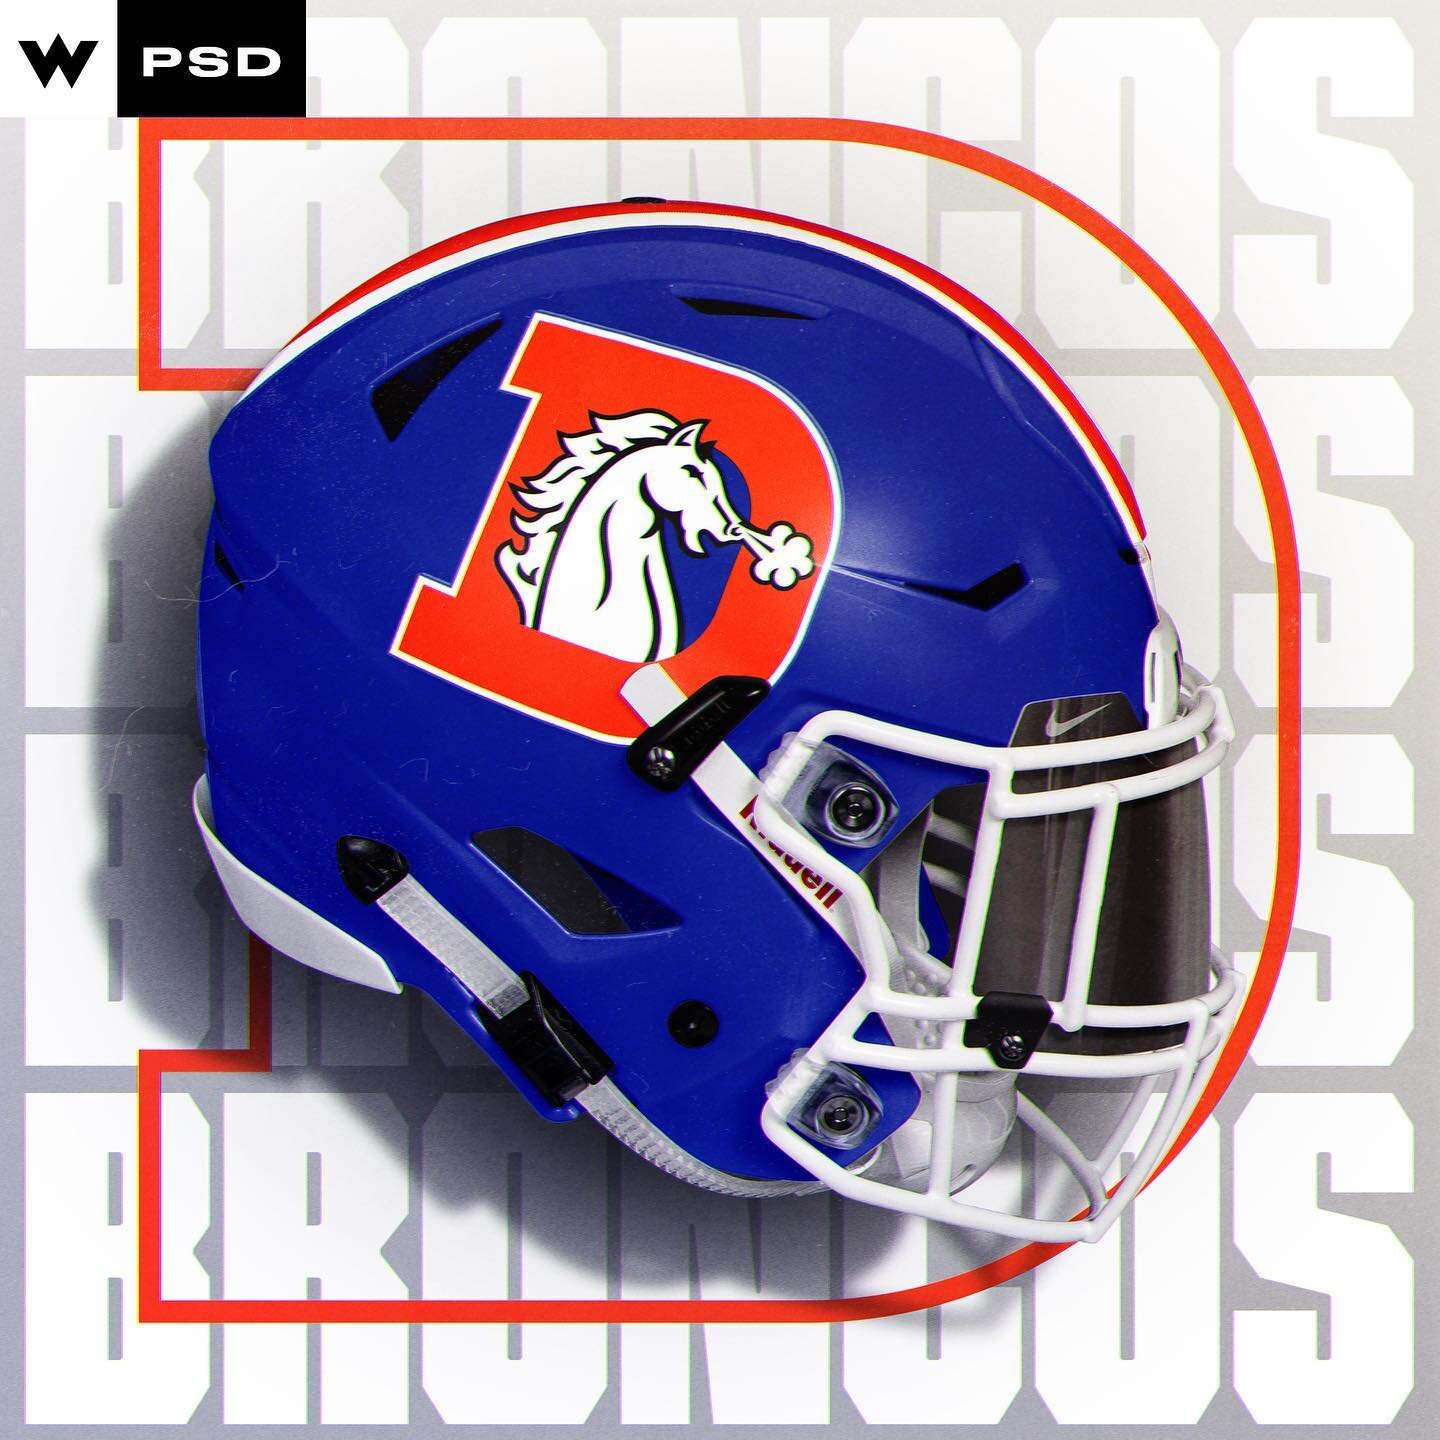 #ThrowbackThursday 🏈 @broncos retro refresh of the 1970 - 1996 logo. 
.
Should we keep going with these retro logo unofficial refreshes?
.
Mockups used: 2.0 Trio, 2.0 Football 3, &amp; Speed Helmet 2.0
.

#webpixum #mockup #sports #sportsdesign #spo